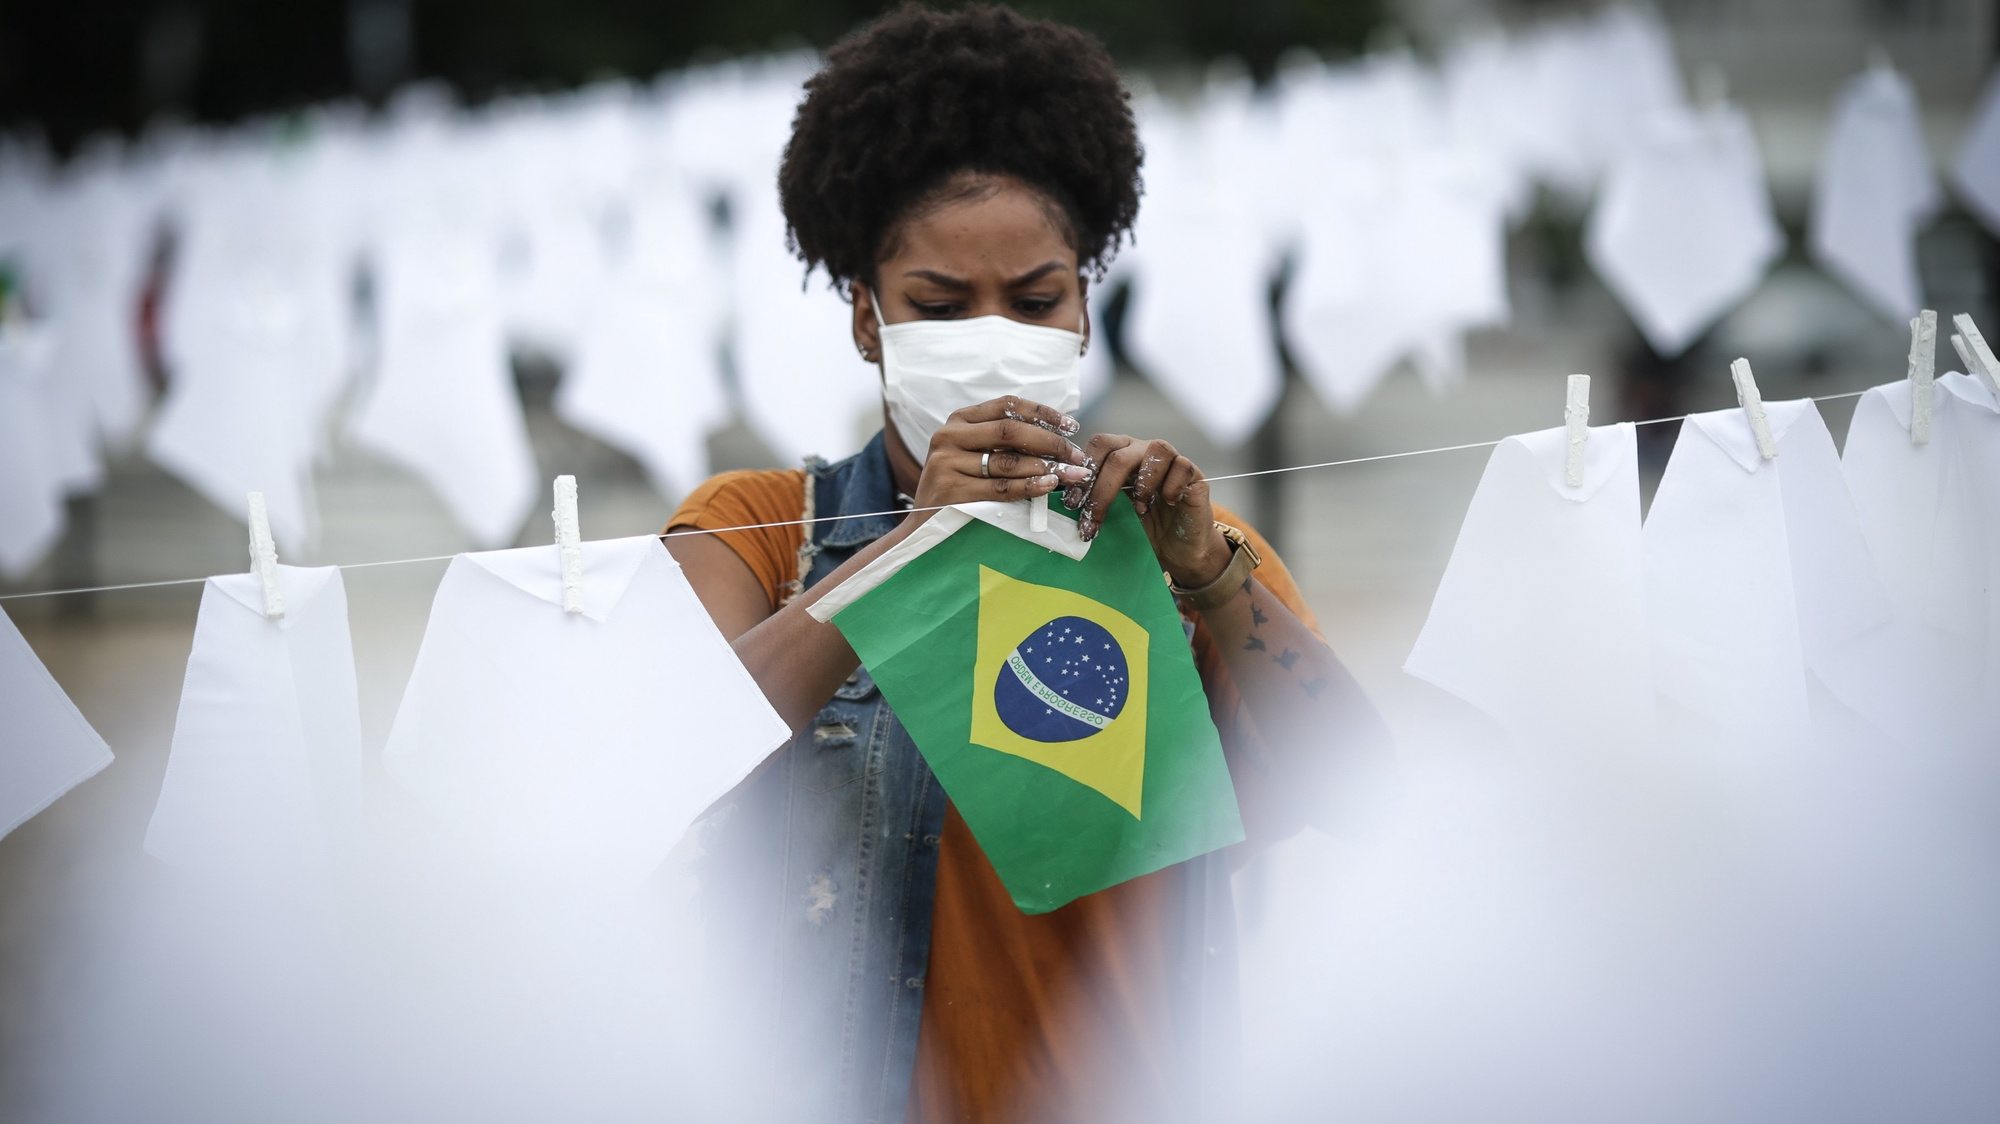 epa09513281 A volunteer helps to hang white handkerchiefs during a tribute to the thousands of fatalities of Covid-19 in Brazil, in Rio de Janeiro, Brazil, 08 October 2021. The NGO Rio de Paz held a protest on the Copacabana beach, in Rio de Janeiro, in which volunteers hung 600 white handkerchiefs in honor of the coronavirus victims in the country, whose number is now close to 600,000, as reported by official sources.  EPA/Andre Coelho